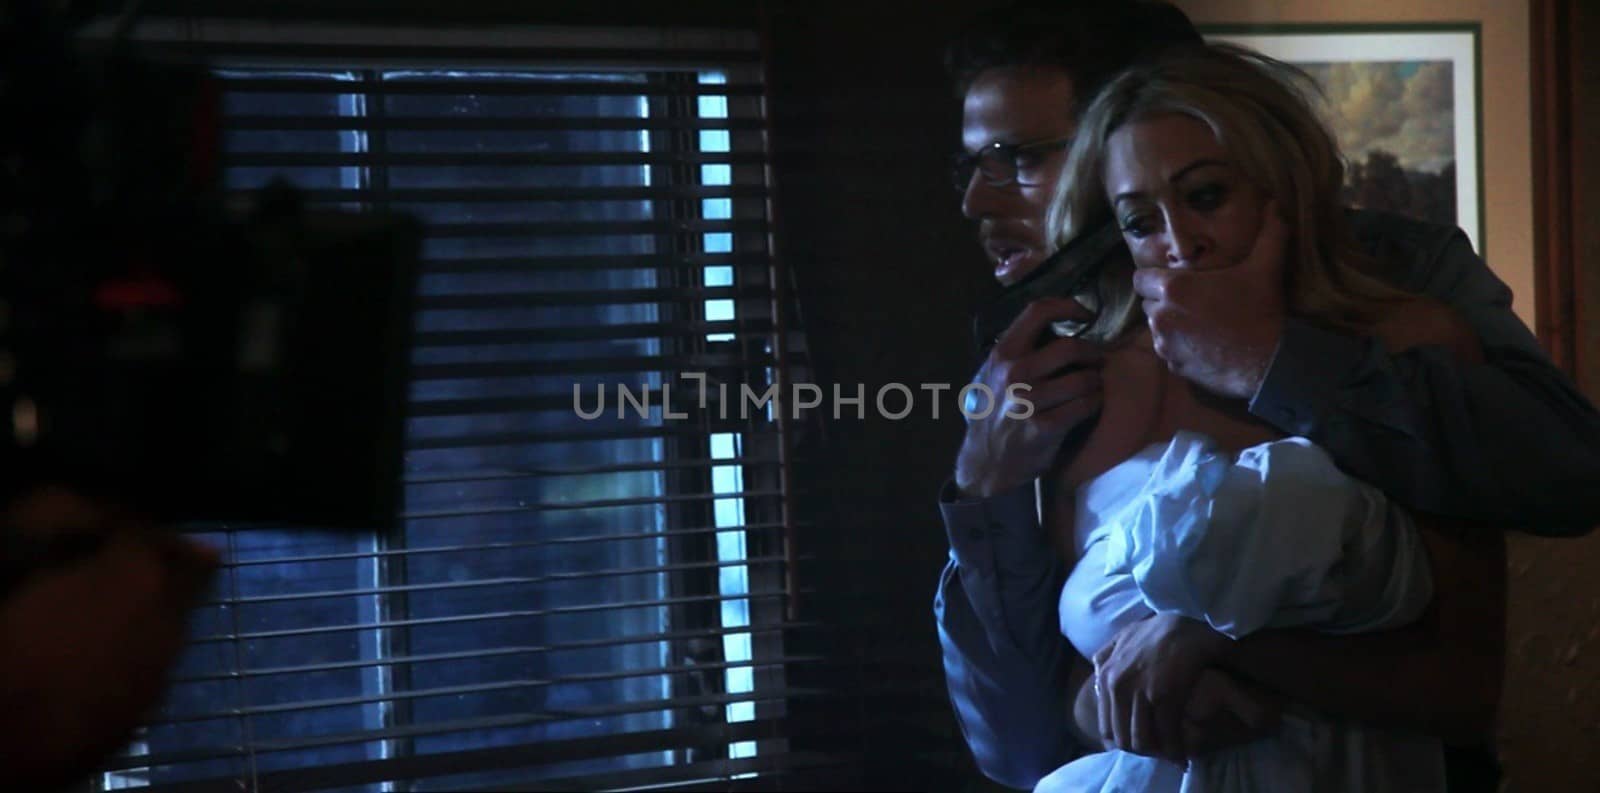 Ryan Honey, Jennifer Blanc On the Set of "The Victim," written and starring Michael Biehn, directed by Brock Morse, Various Locations, Los Angeles, CA. 09-28-10/ImageCollect by ImageCollect